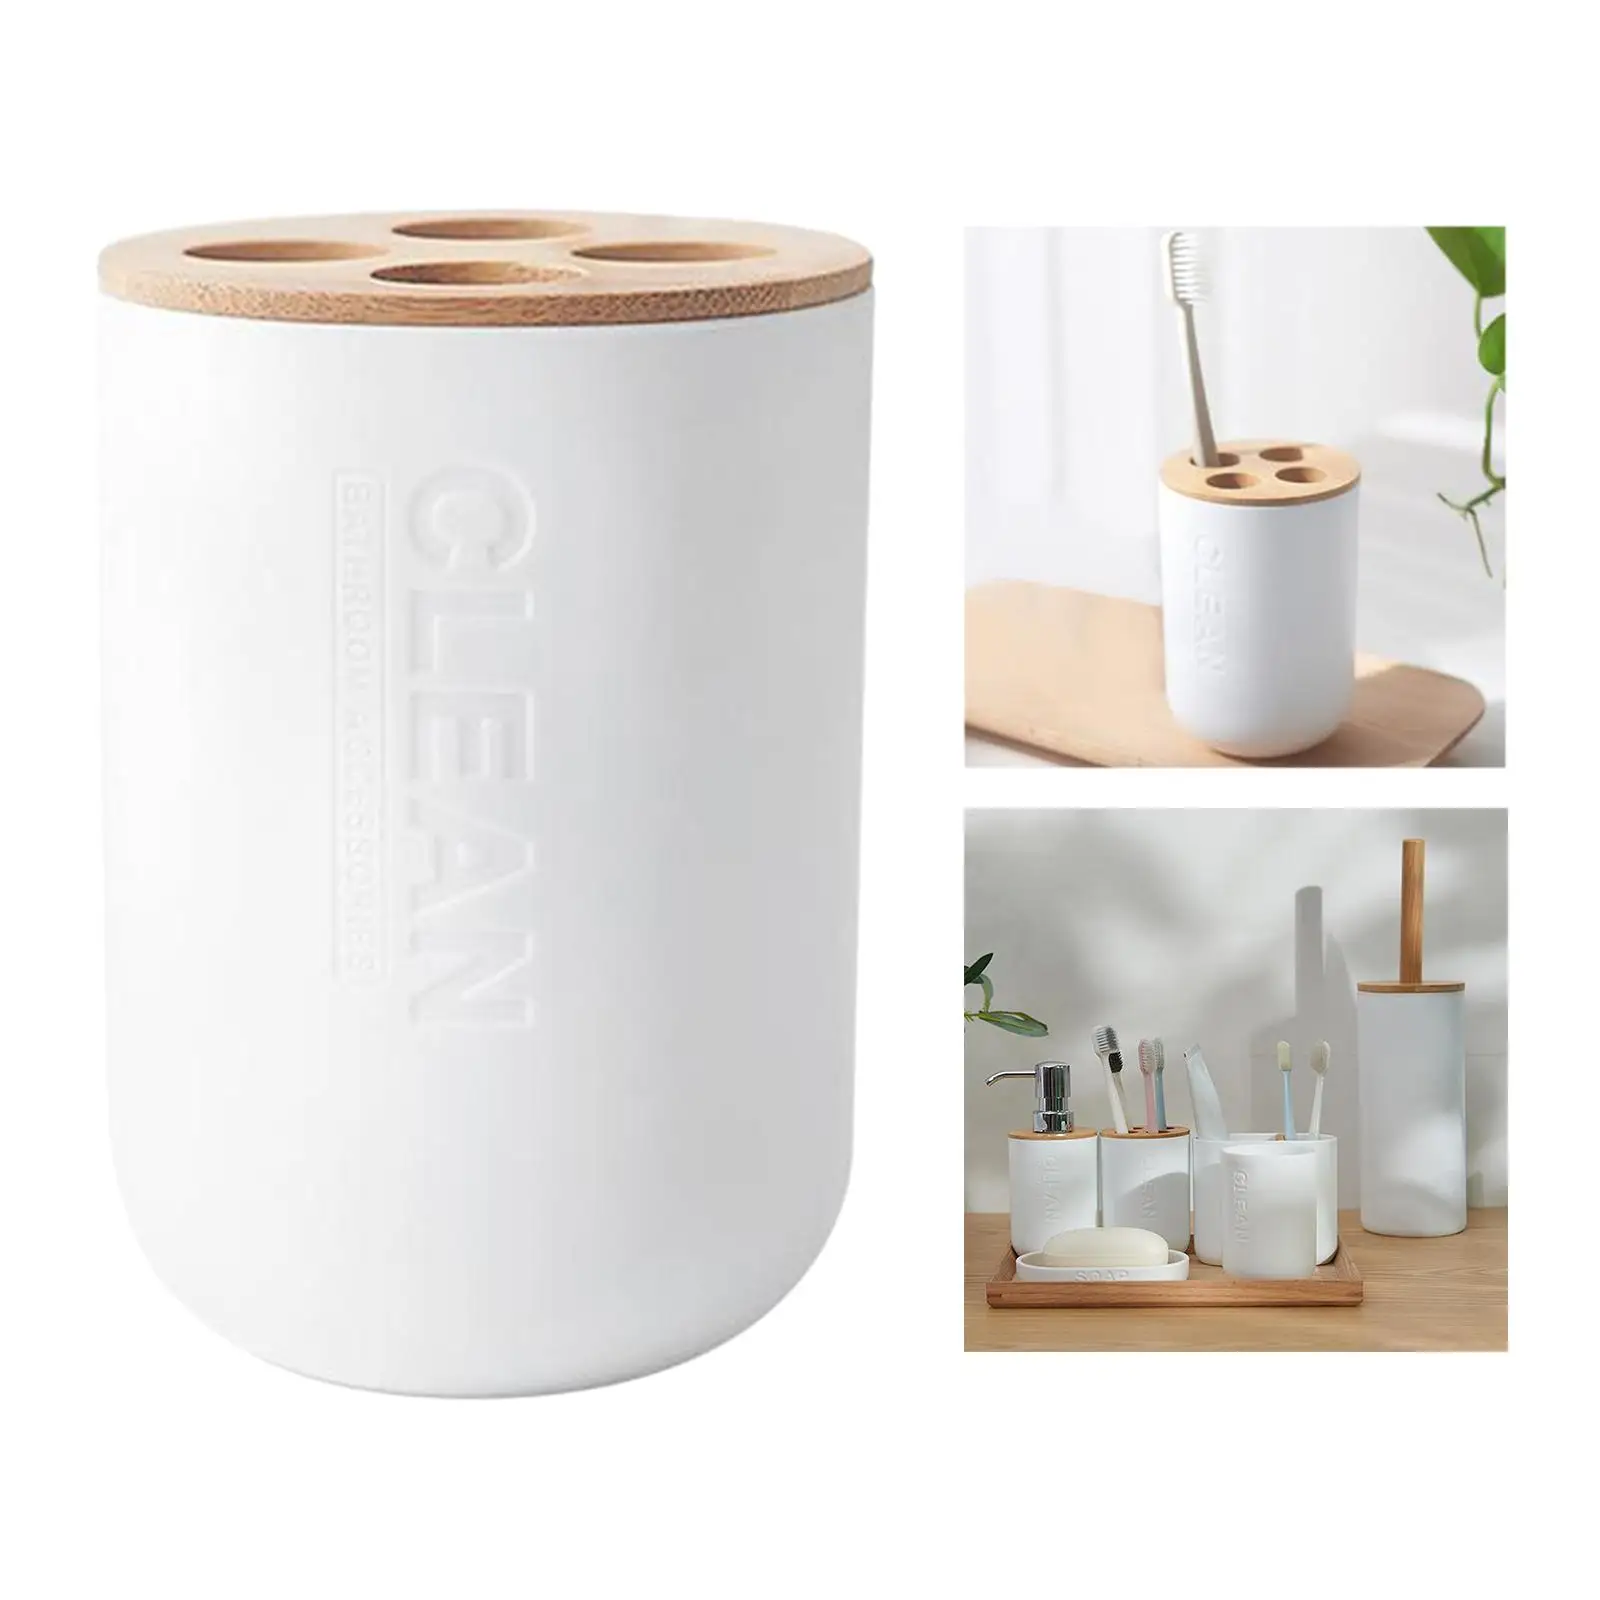 Bathroom Accessories for Hotel Bath Countertop Decor Durable White Color Smooth Easily Clean Dispenser PP Fashionable